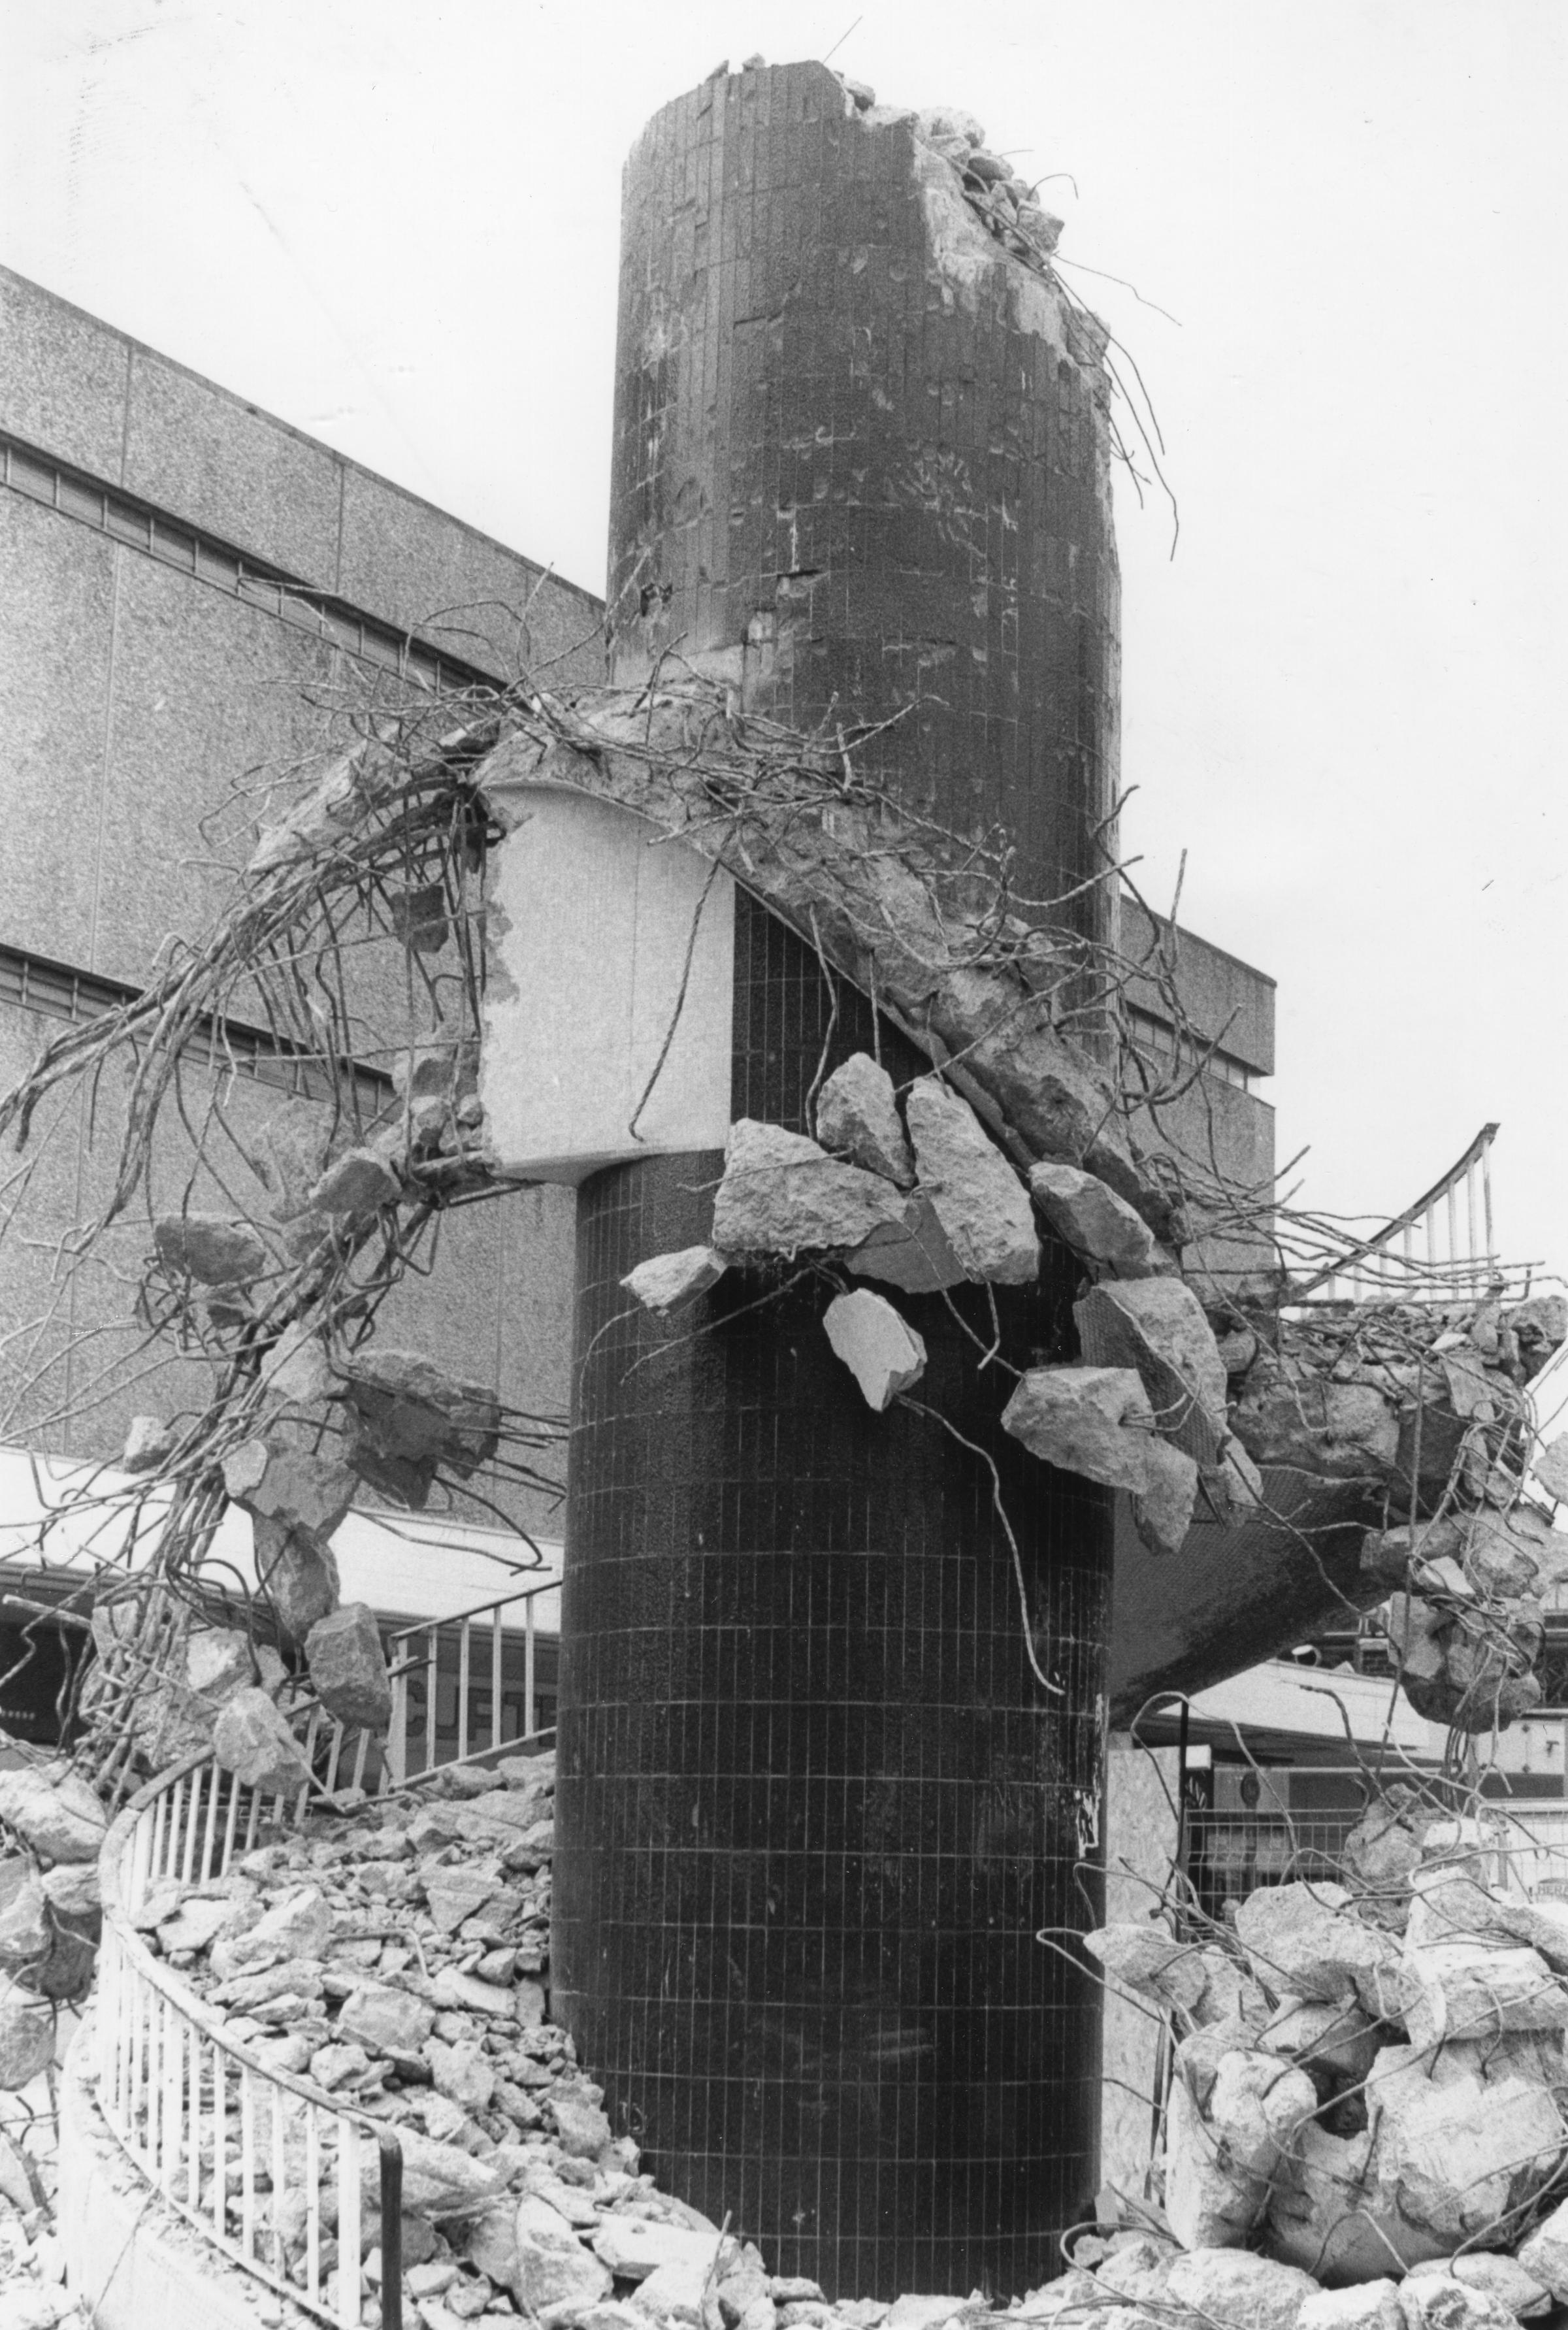 The chimney structure that once stood in Cwmbran town centre until 1992. It was originally designed to support a fire escape but the landmark had significant visual impact